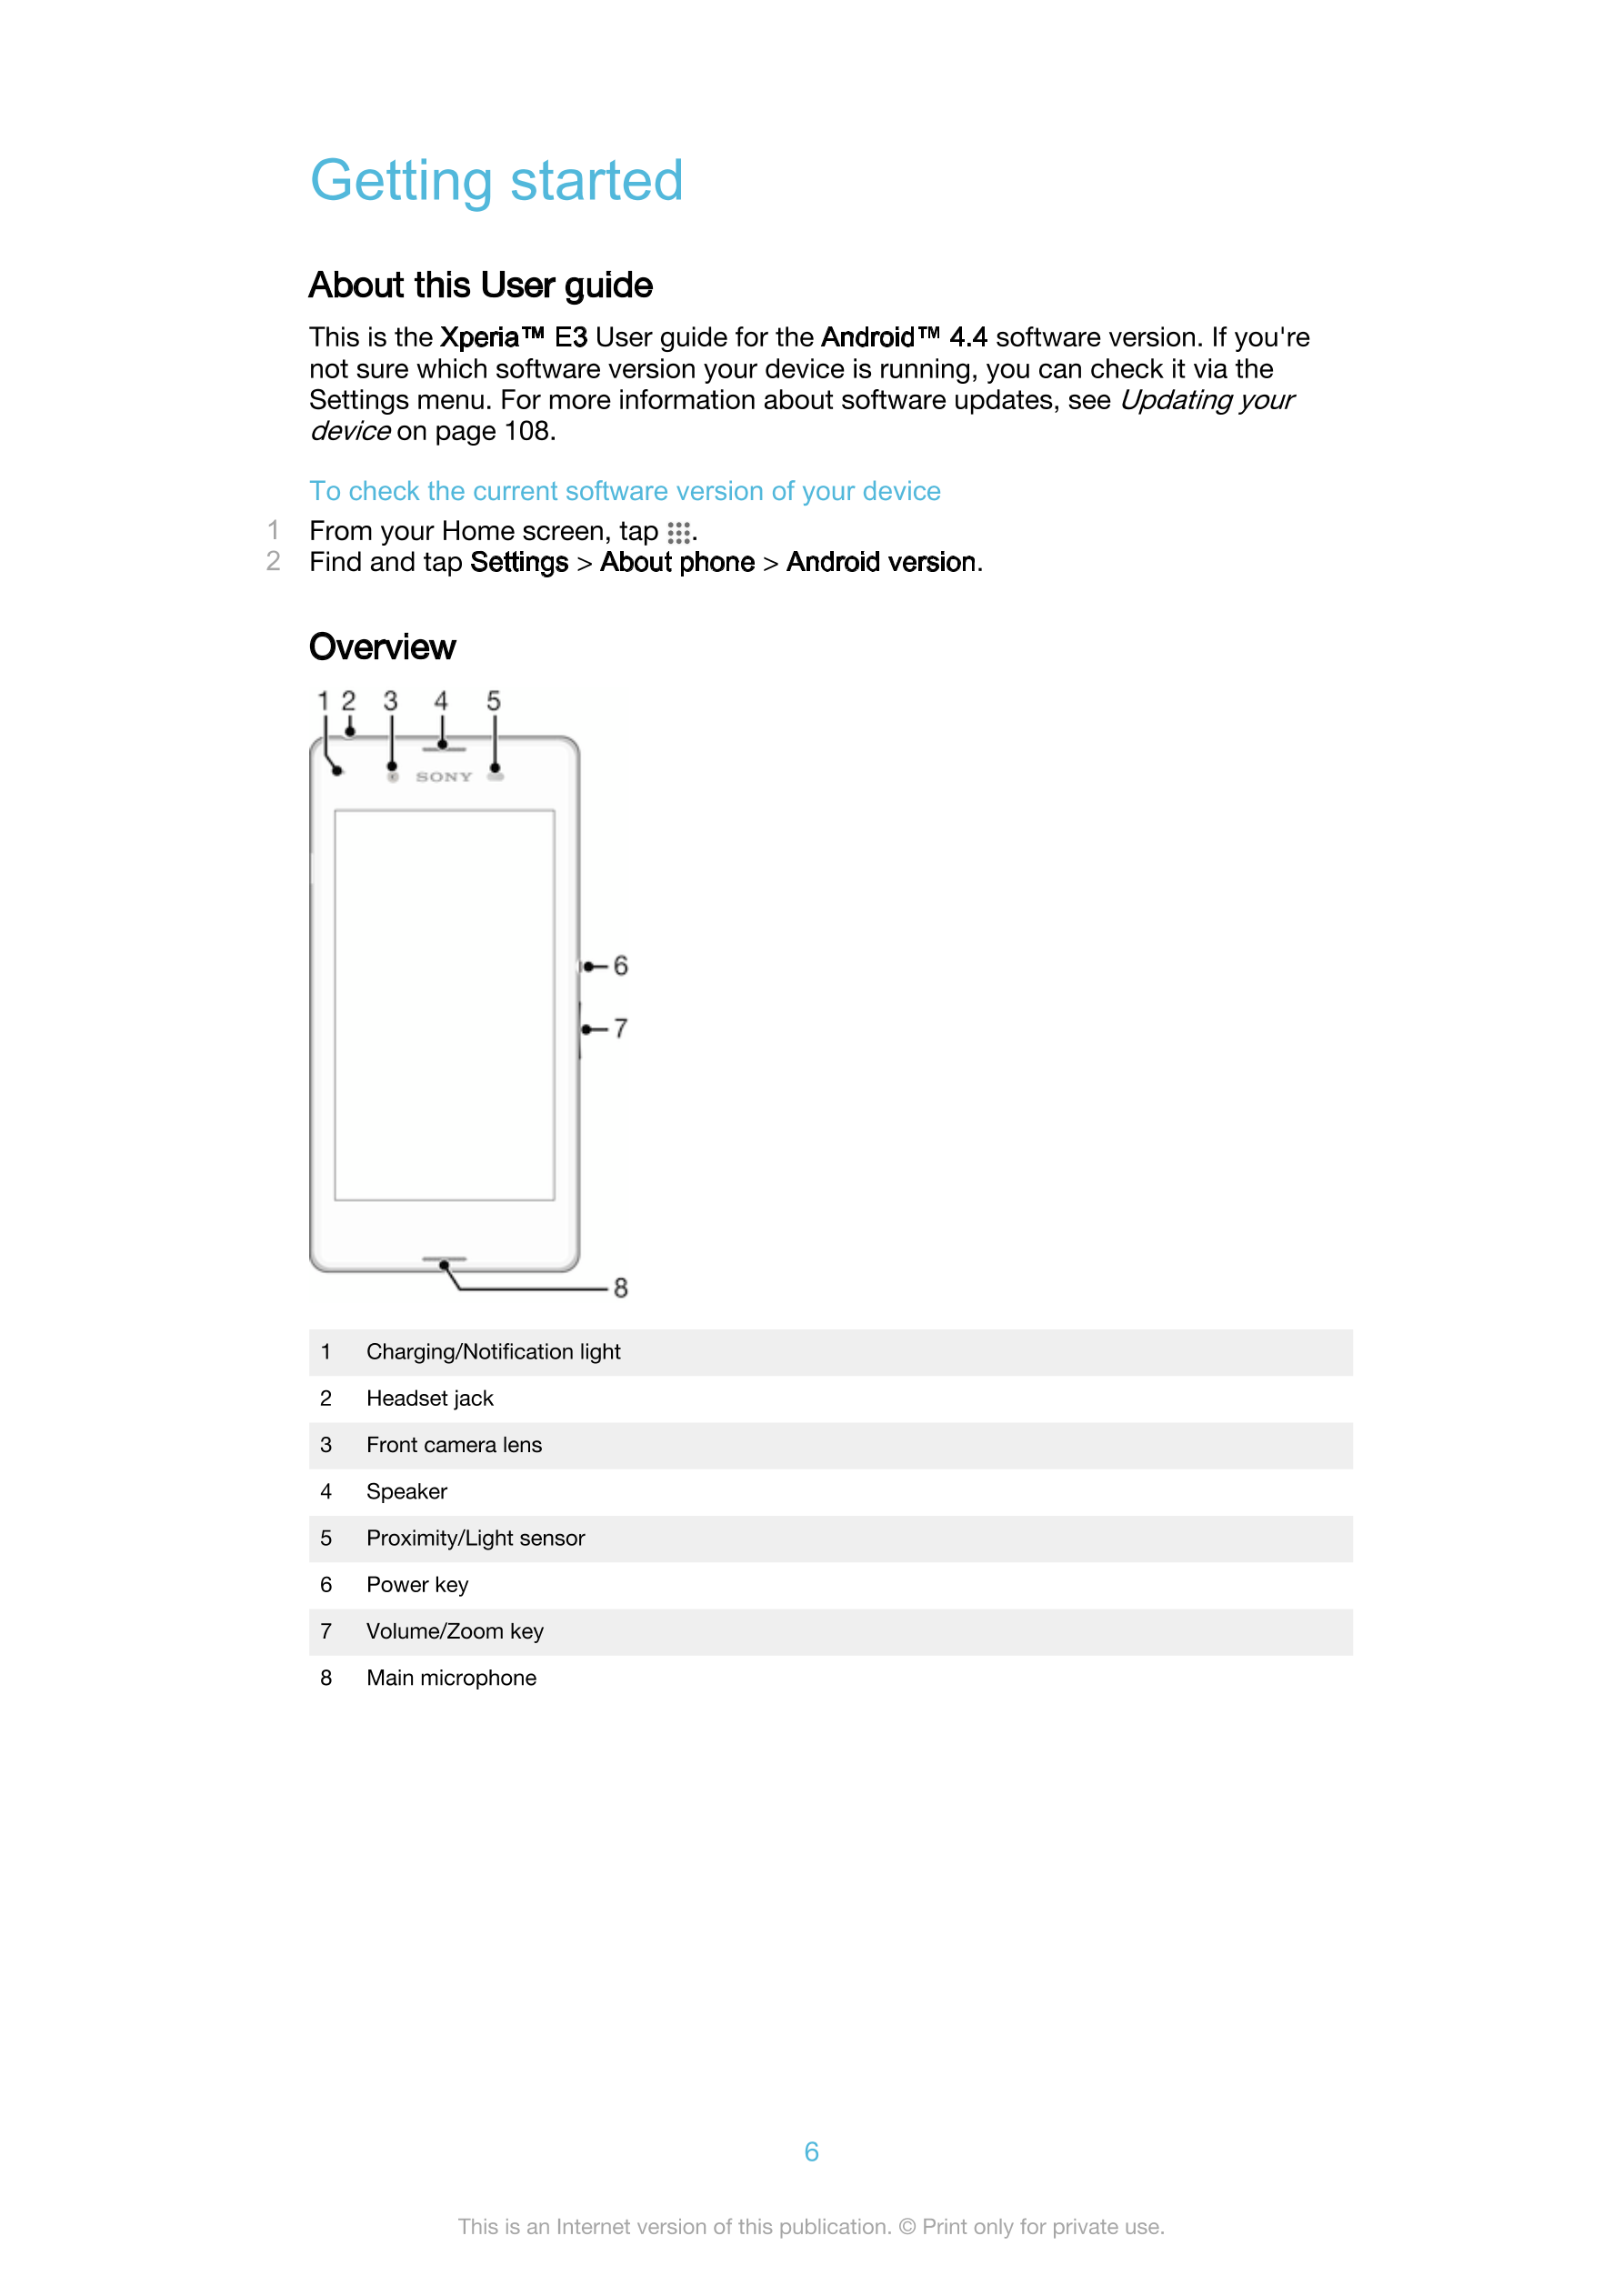 Getting started
About this User guide
This is the  Xperia™ E3 User guide for the  Android™ 4.4 software version. If you're
not s